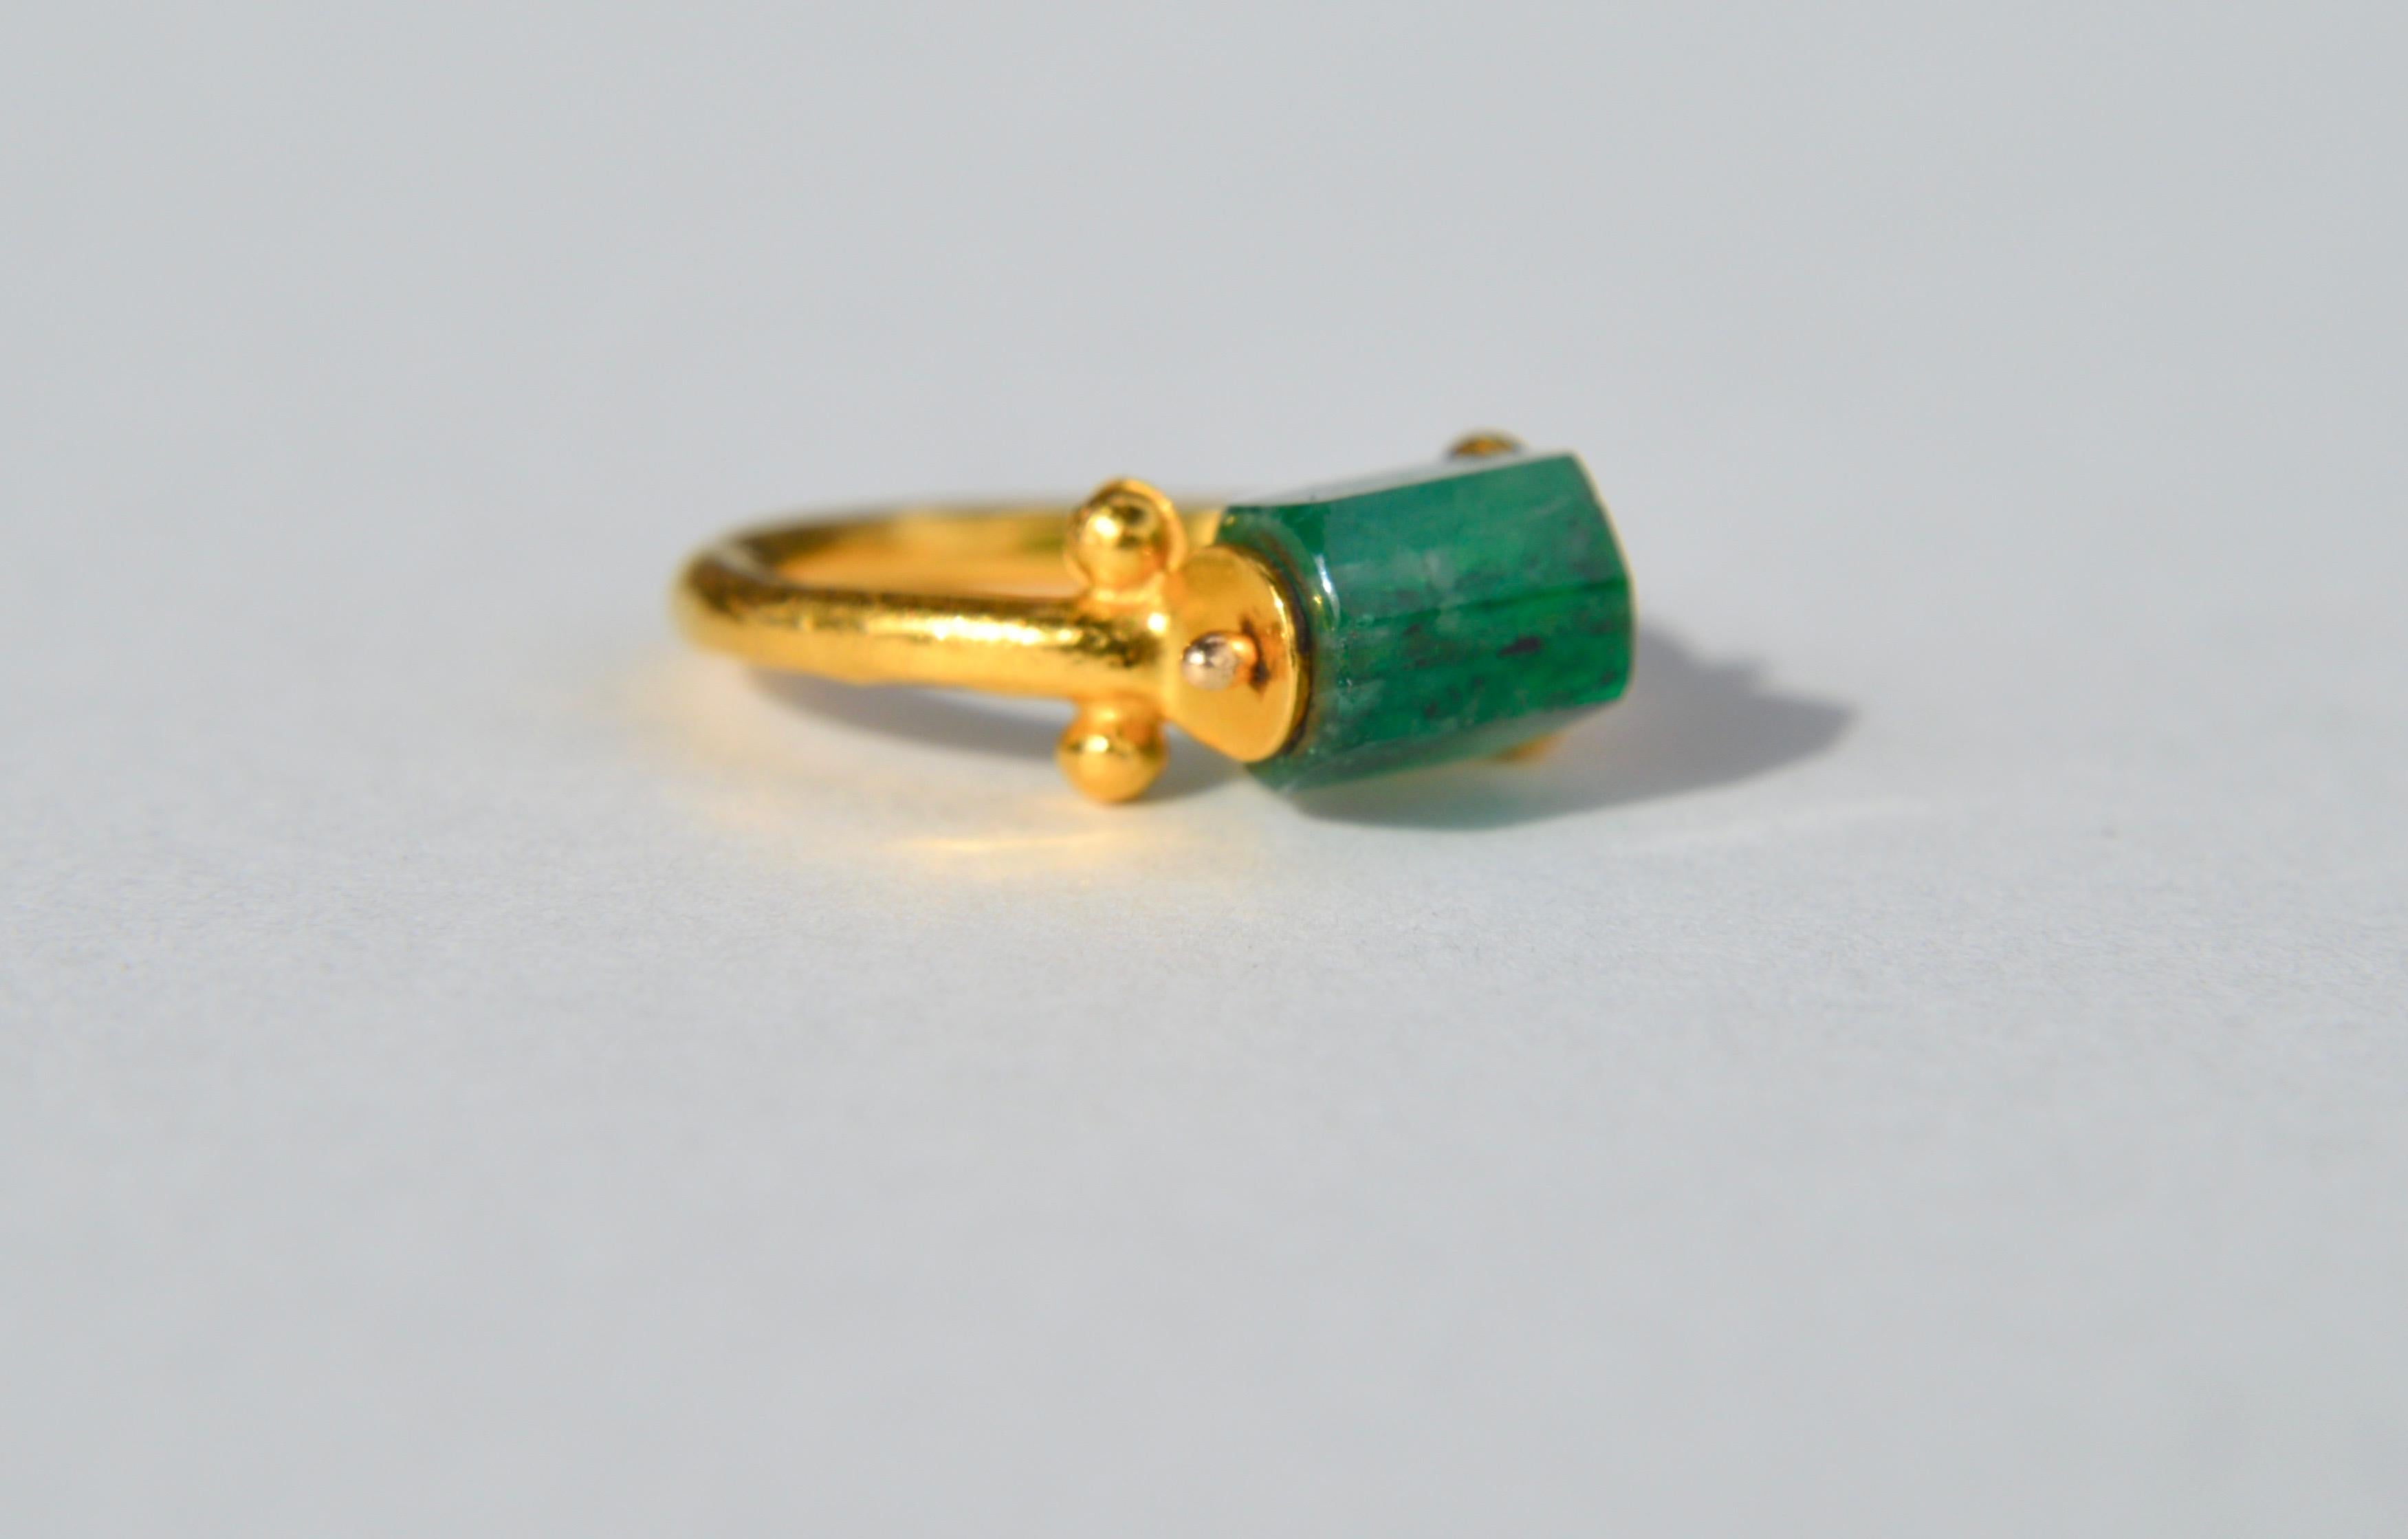 Gorgeous natural genuine hexagonal emerald and solid 14K yellow gold Egyptian / Hellenistic Greek reproduction ring from The Metropolitan Museum of Art NYC circa 1970s.

After Egypt came under the rule of the Hellenistic Greeks (323-27 B.C.), and